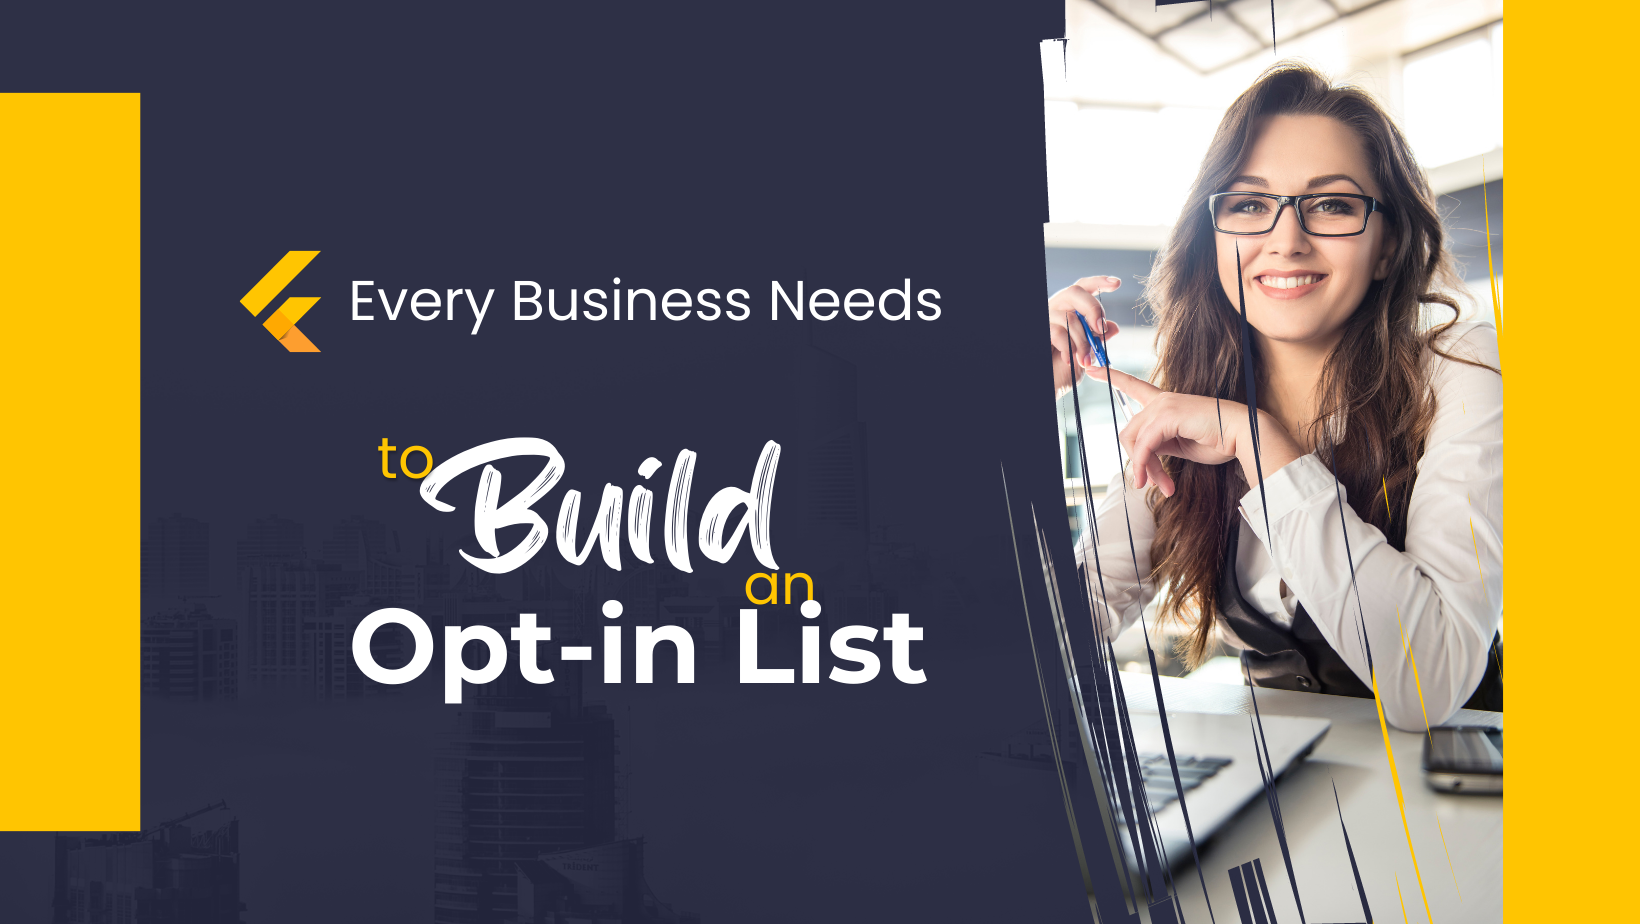 Ultimate Guide to Build an Opt-in List